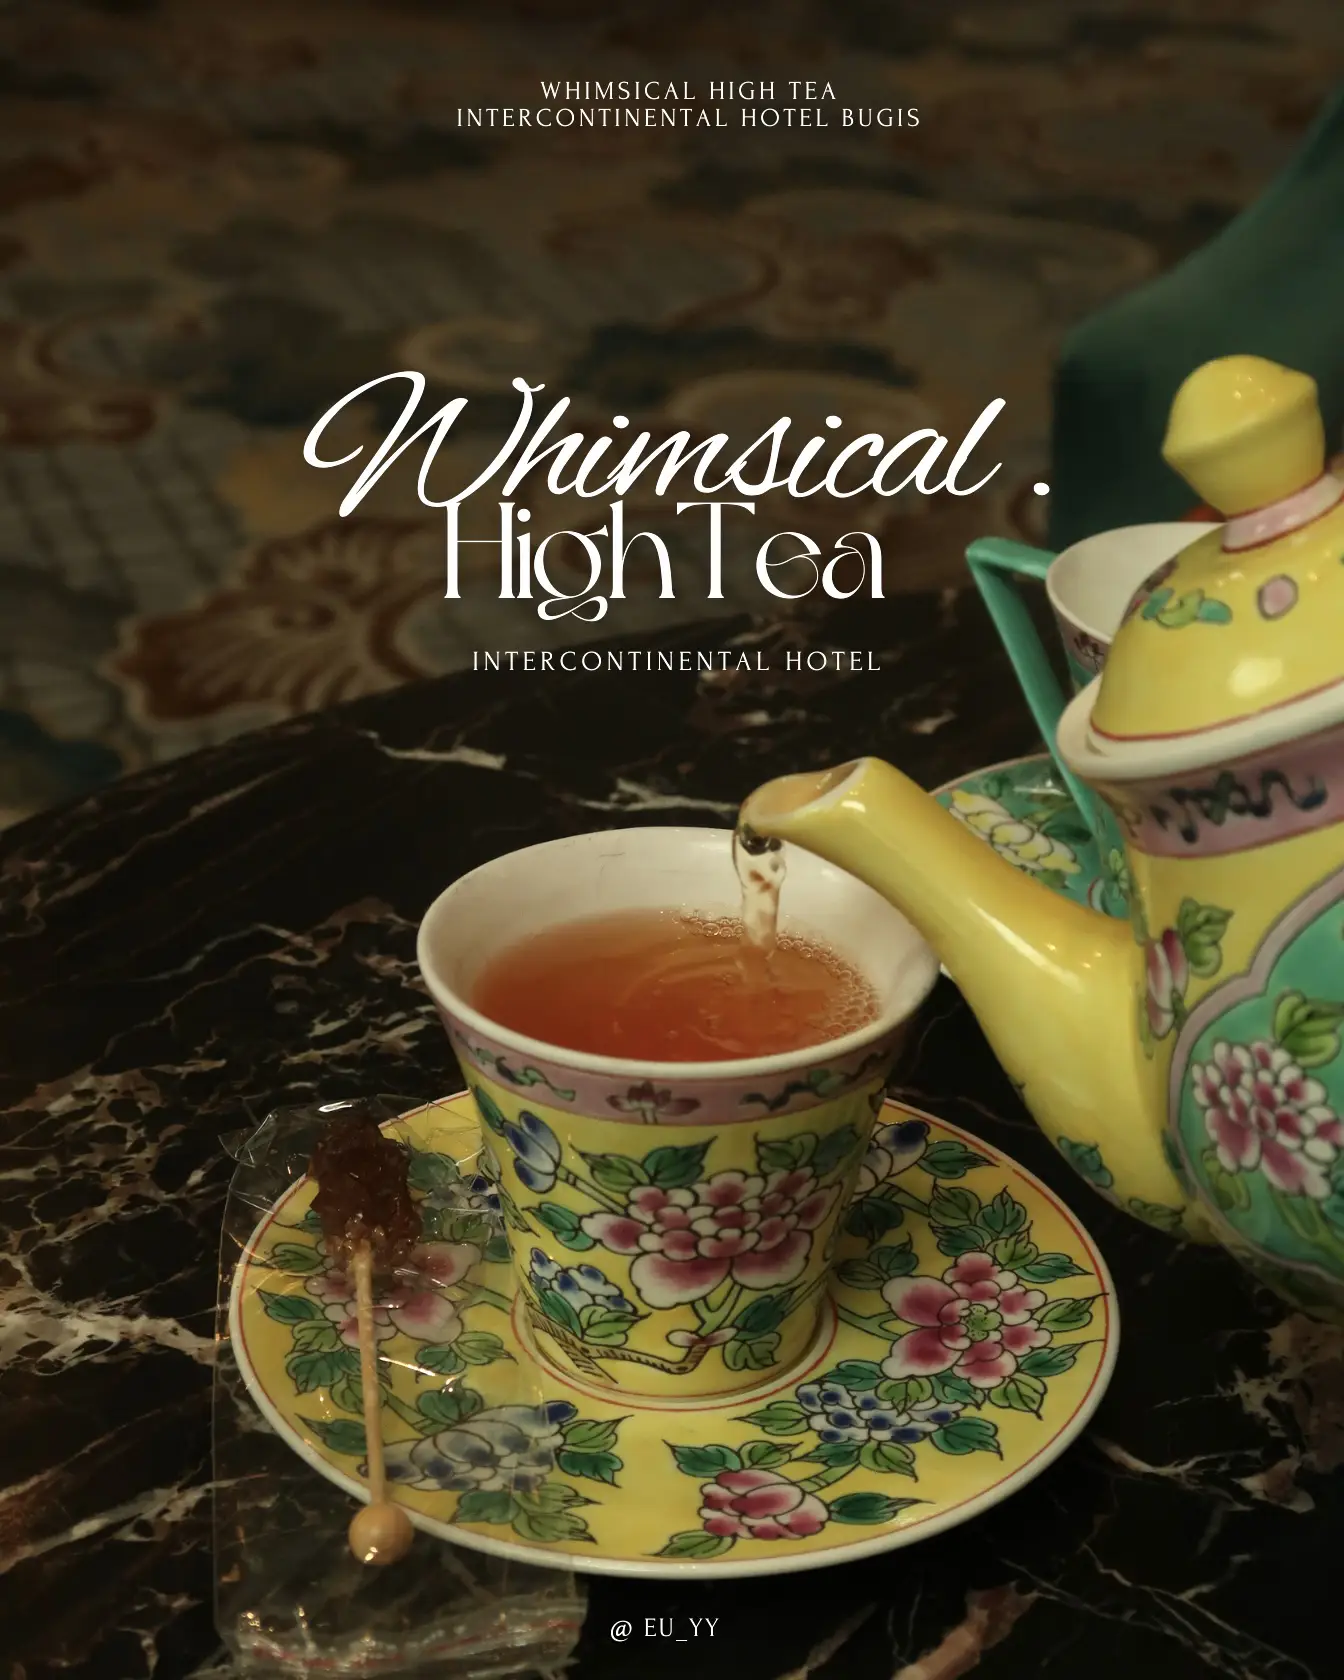 Whimsical Tea Set with Alice in Wonderland